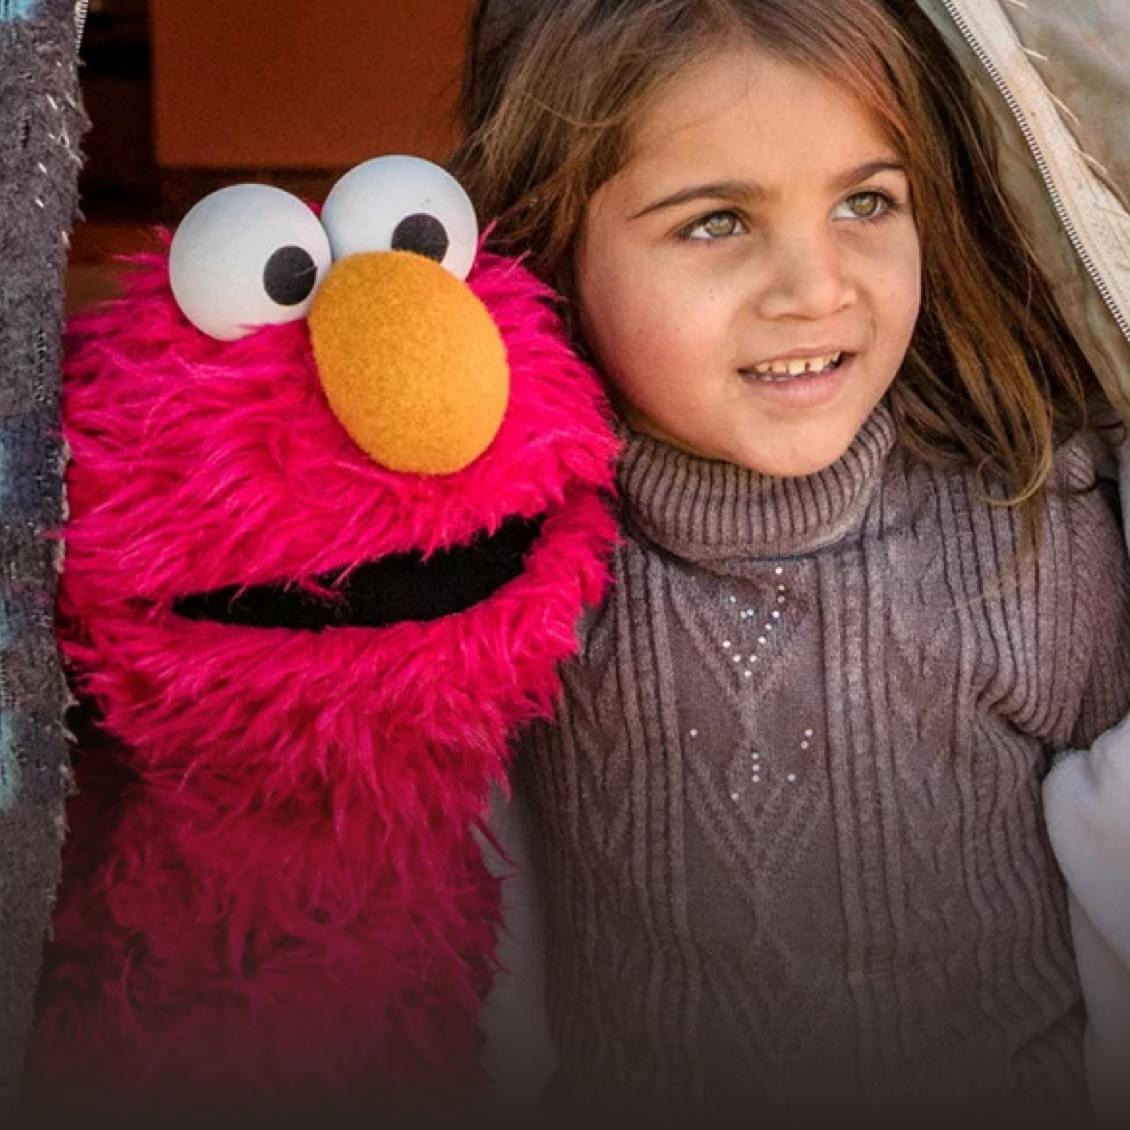 a kid getting a photo with Elmo